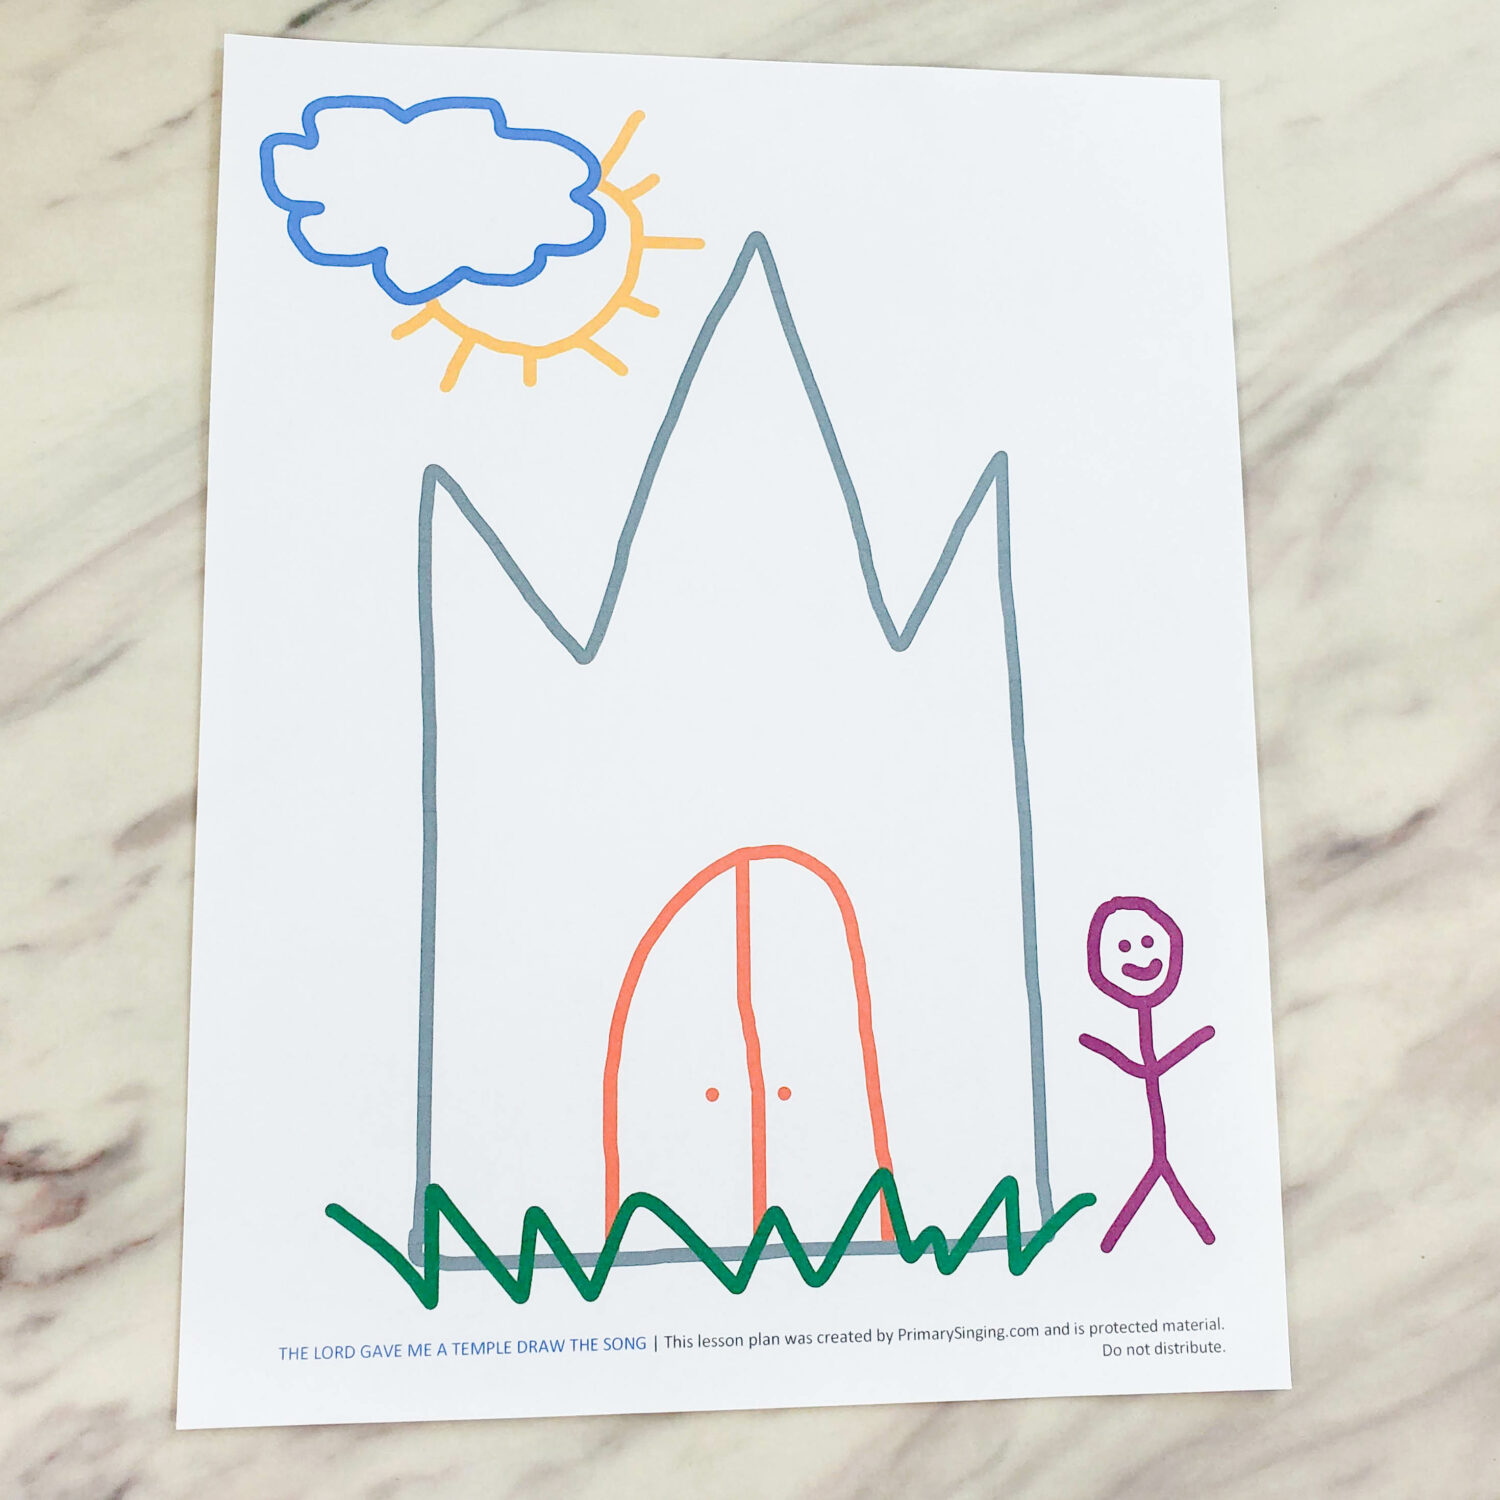 The Lord Gave Me a Temple Draw the Song singing time idea! Draw these 6 simple shapes that coordinate with a line or partial line of the song. Then, bring them all together to reveal a scene as you teach about what this important song is talking about. Includes a free printable 1-page drawing guide for LDS Primary music leaders.